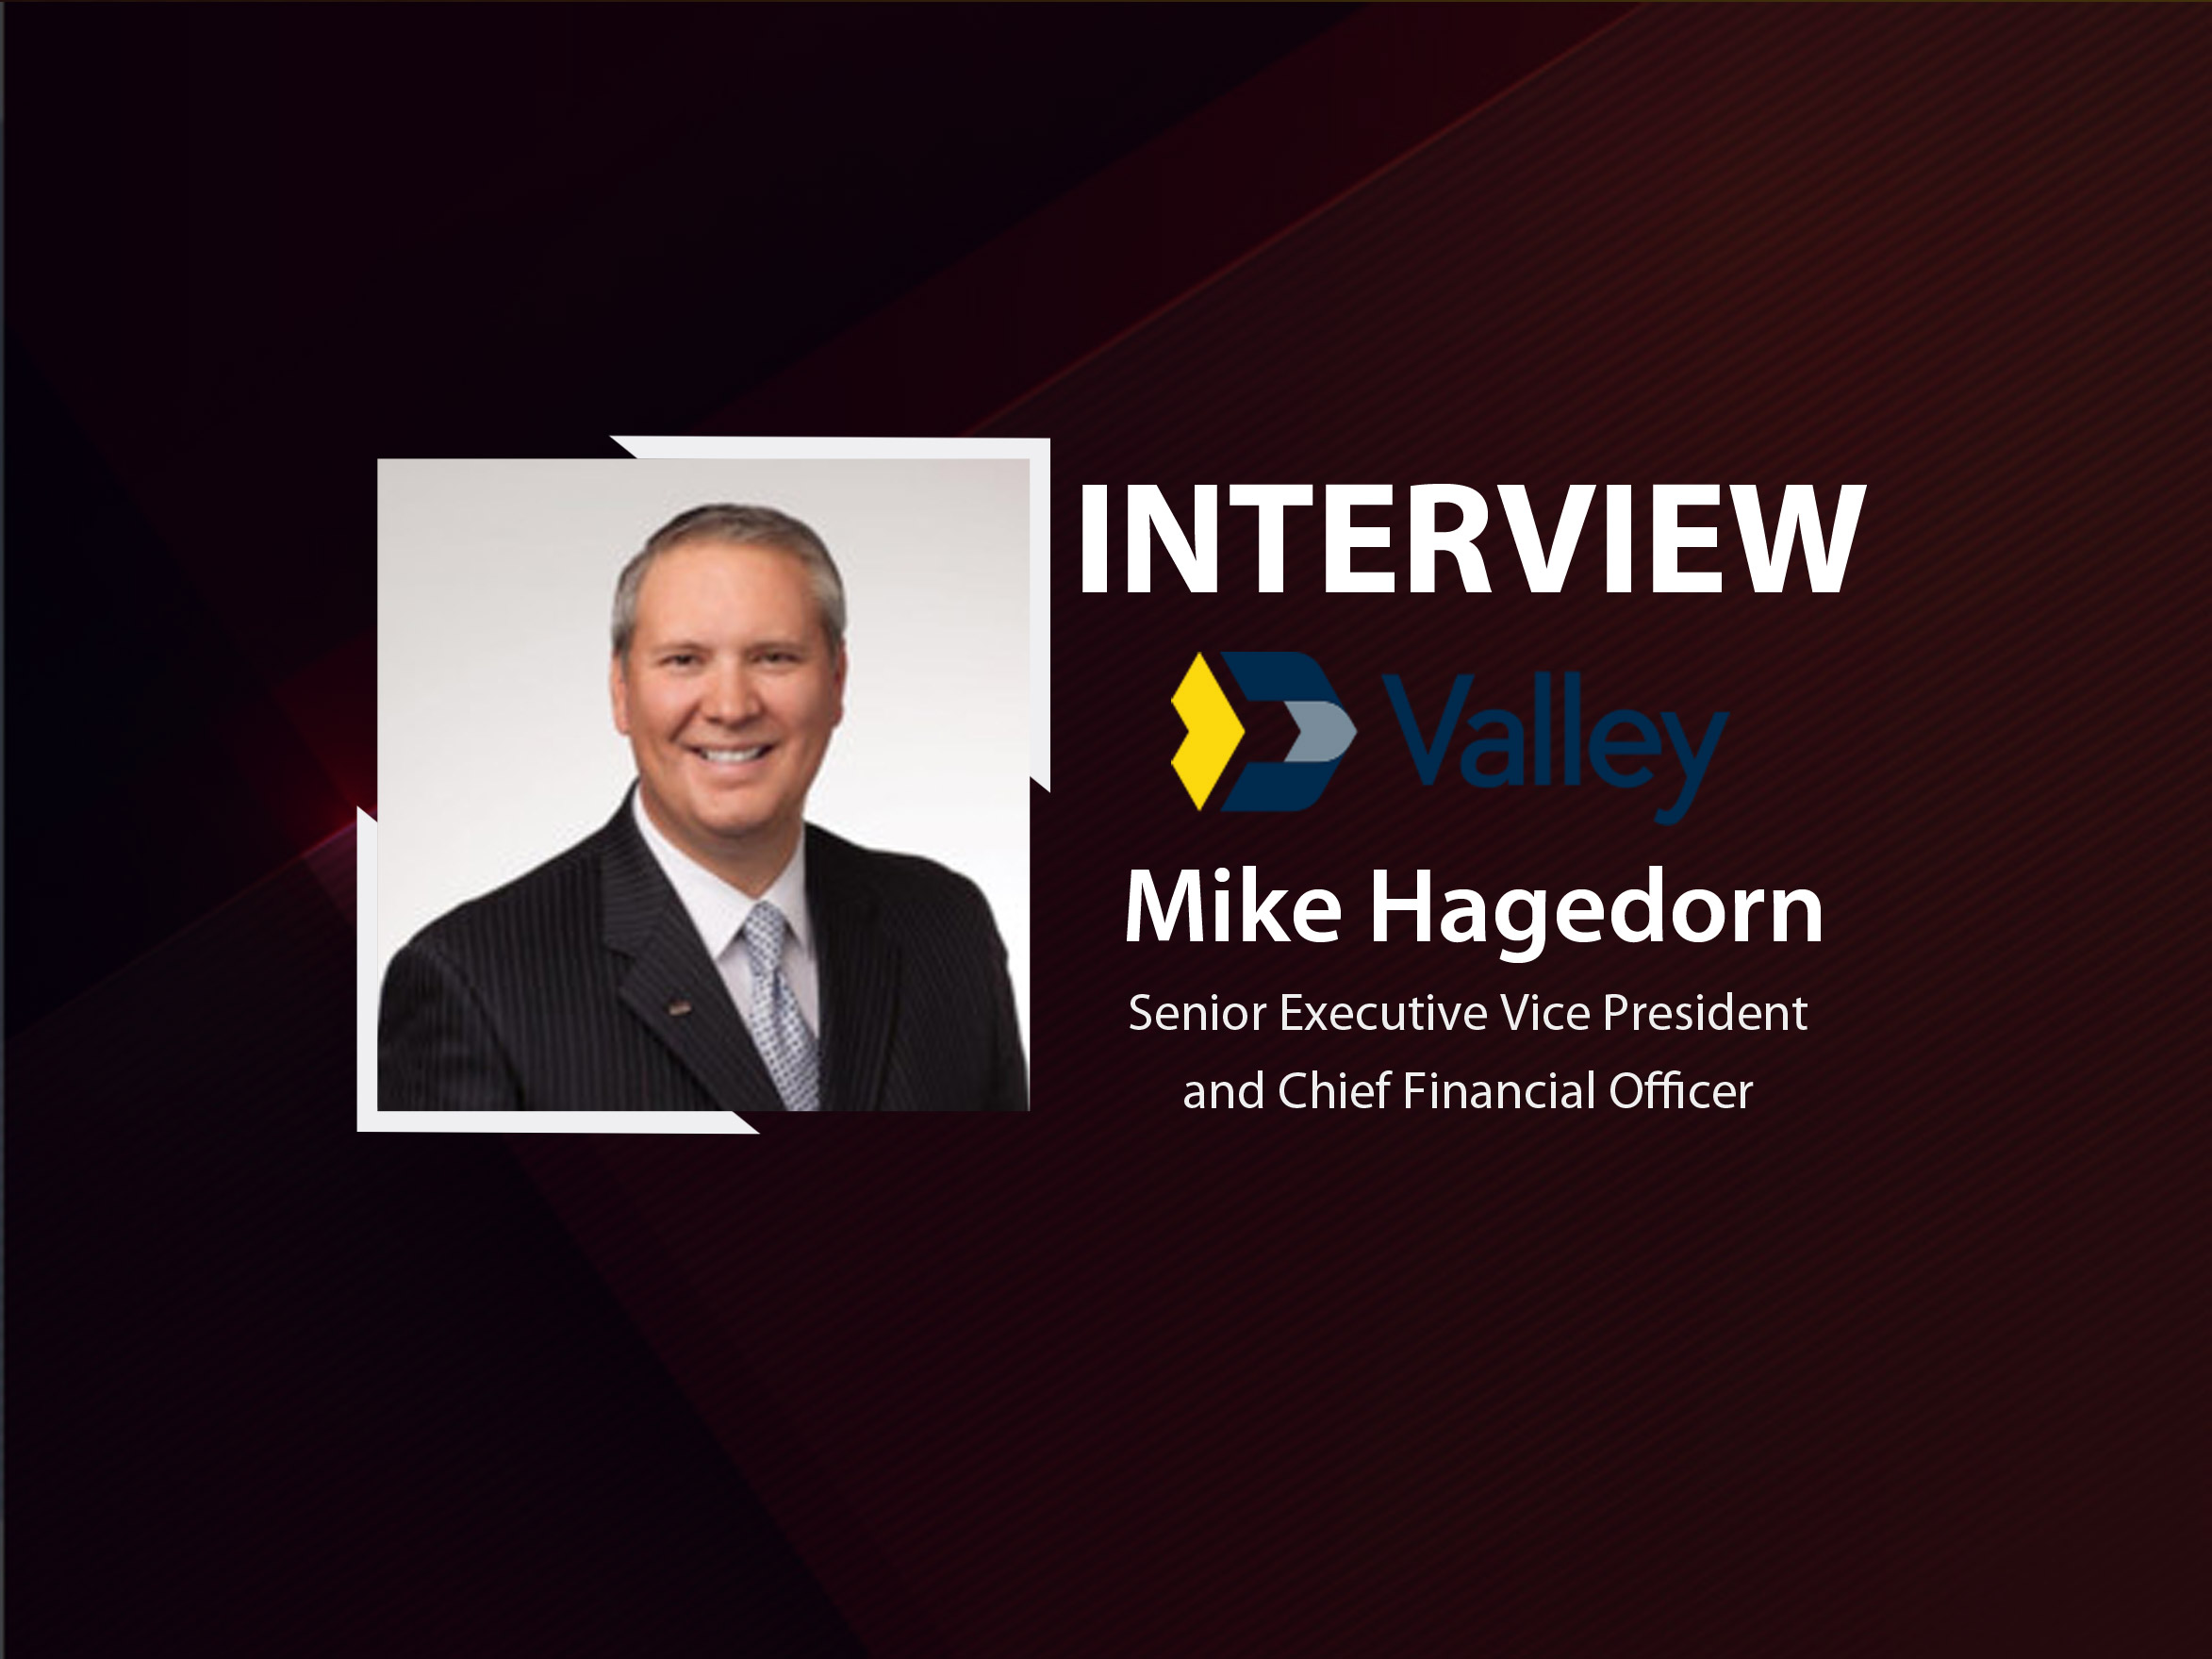 GlobalFintechSeries Interview with Michael Hagedorn, Senior Executive Vice President and Chief Financial Officer at Valley National Bank